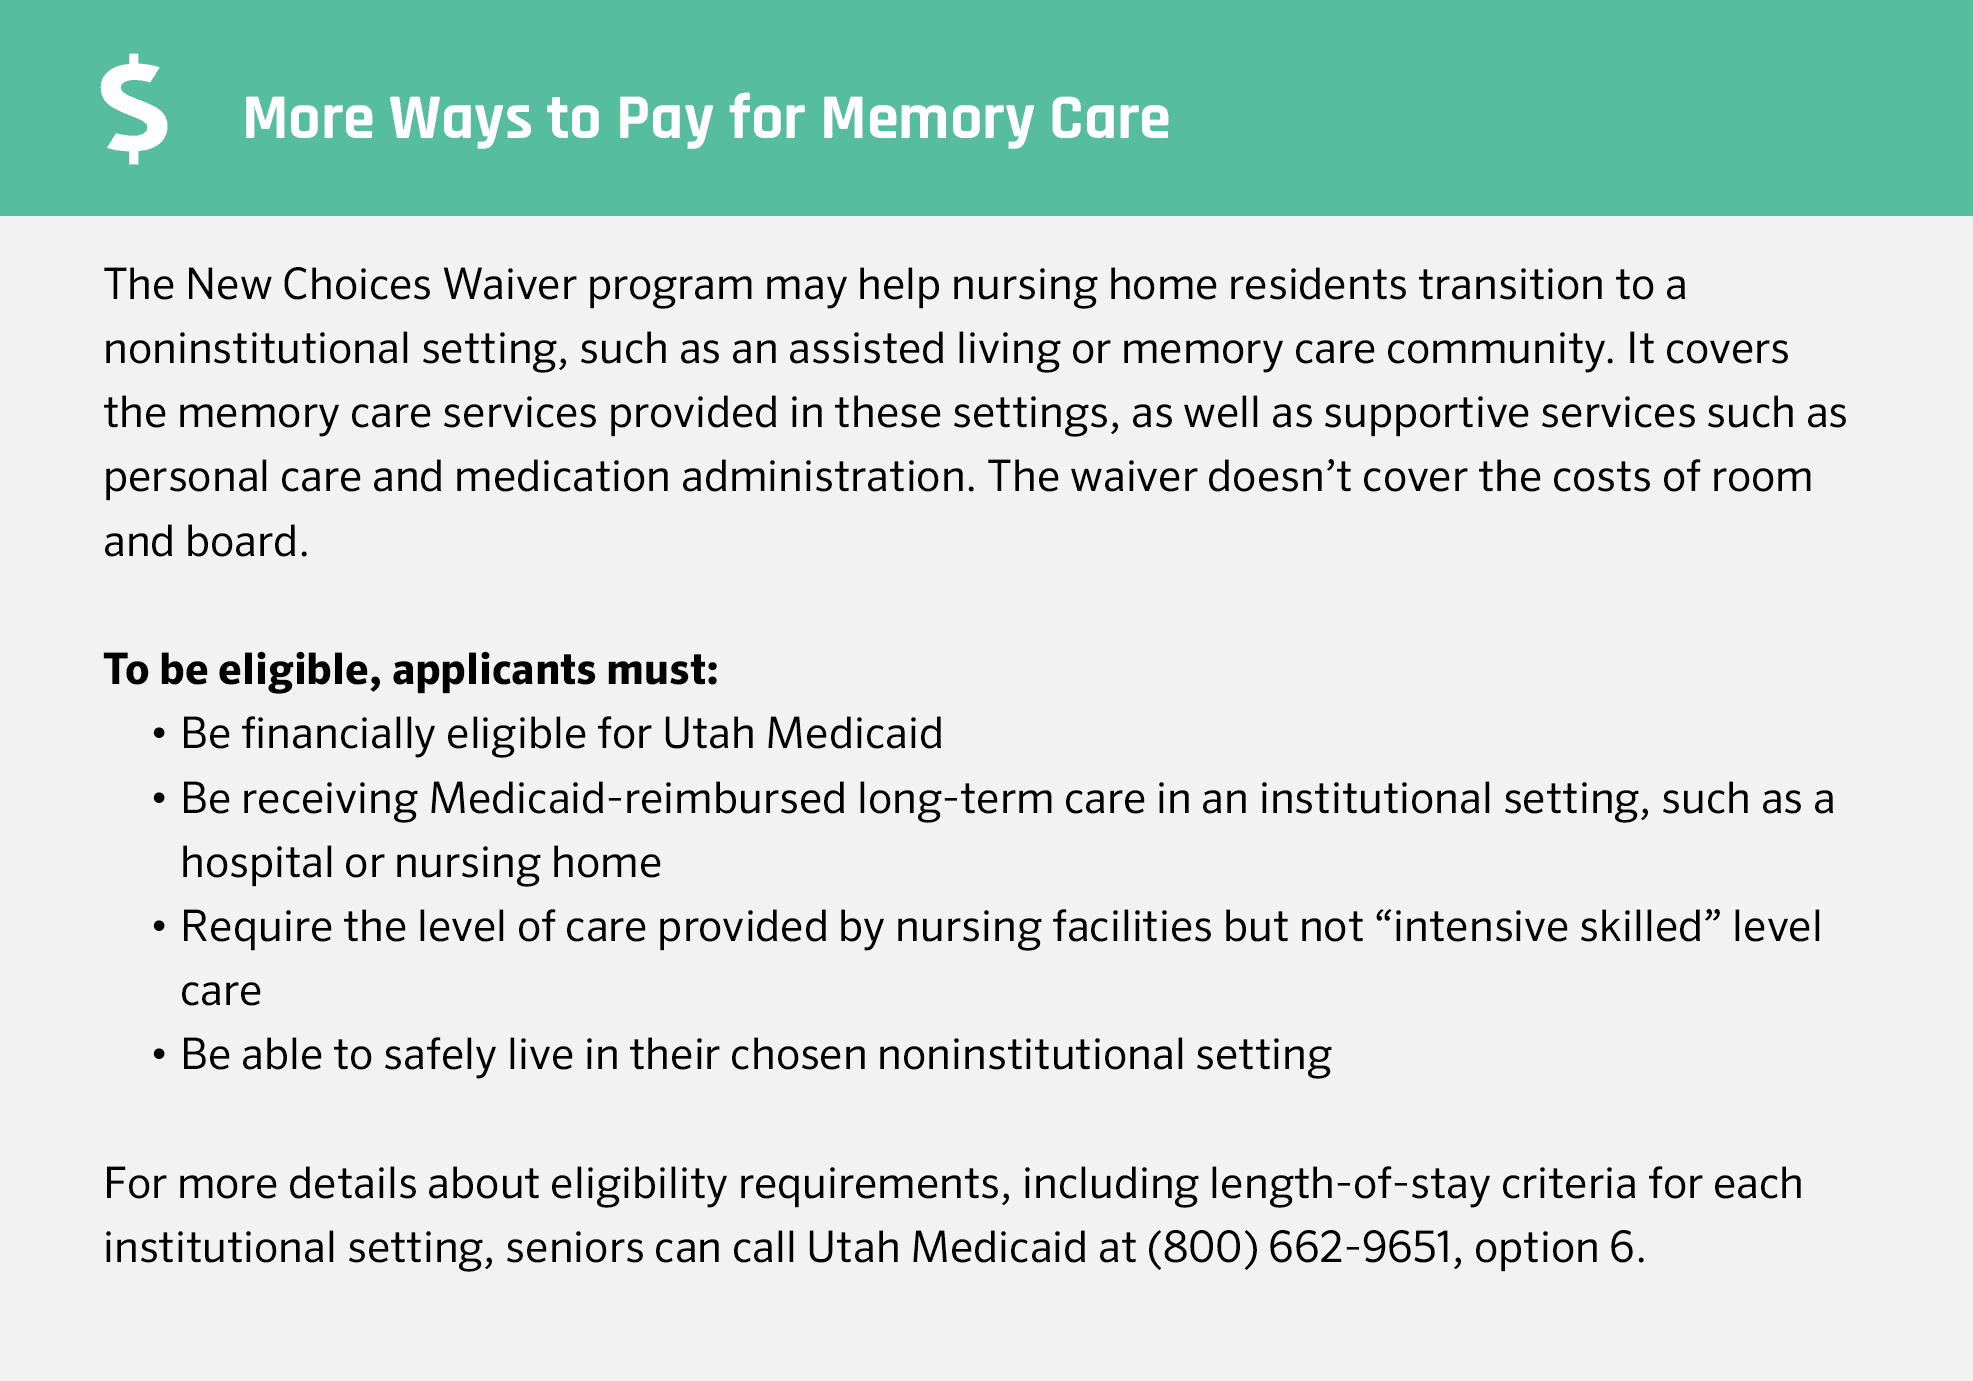 Financial Assistance for Memory Care in Utah